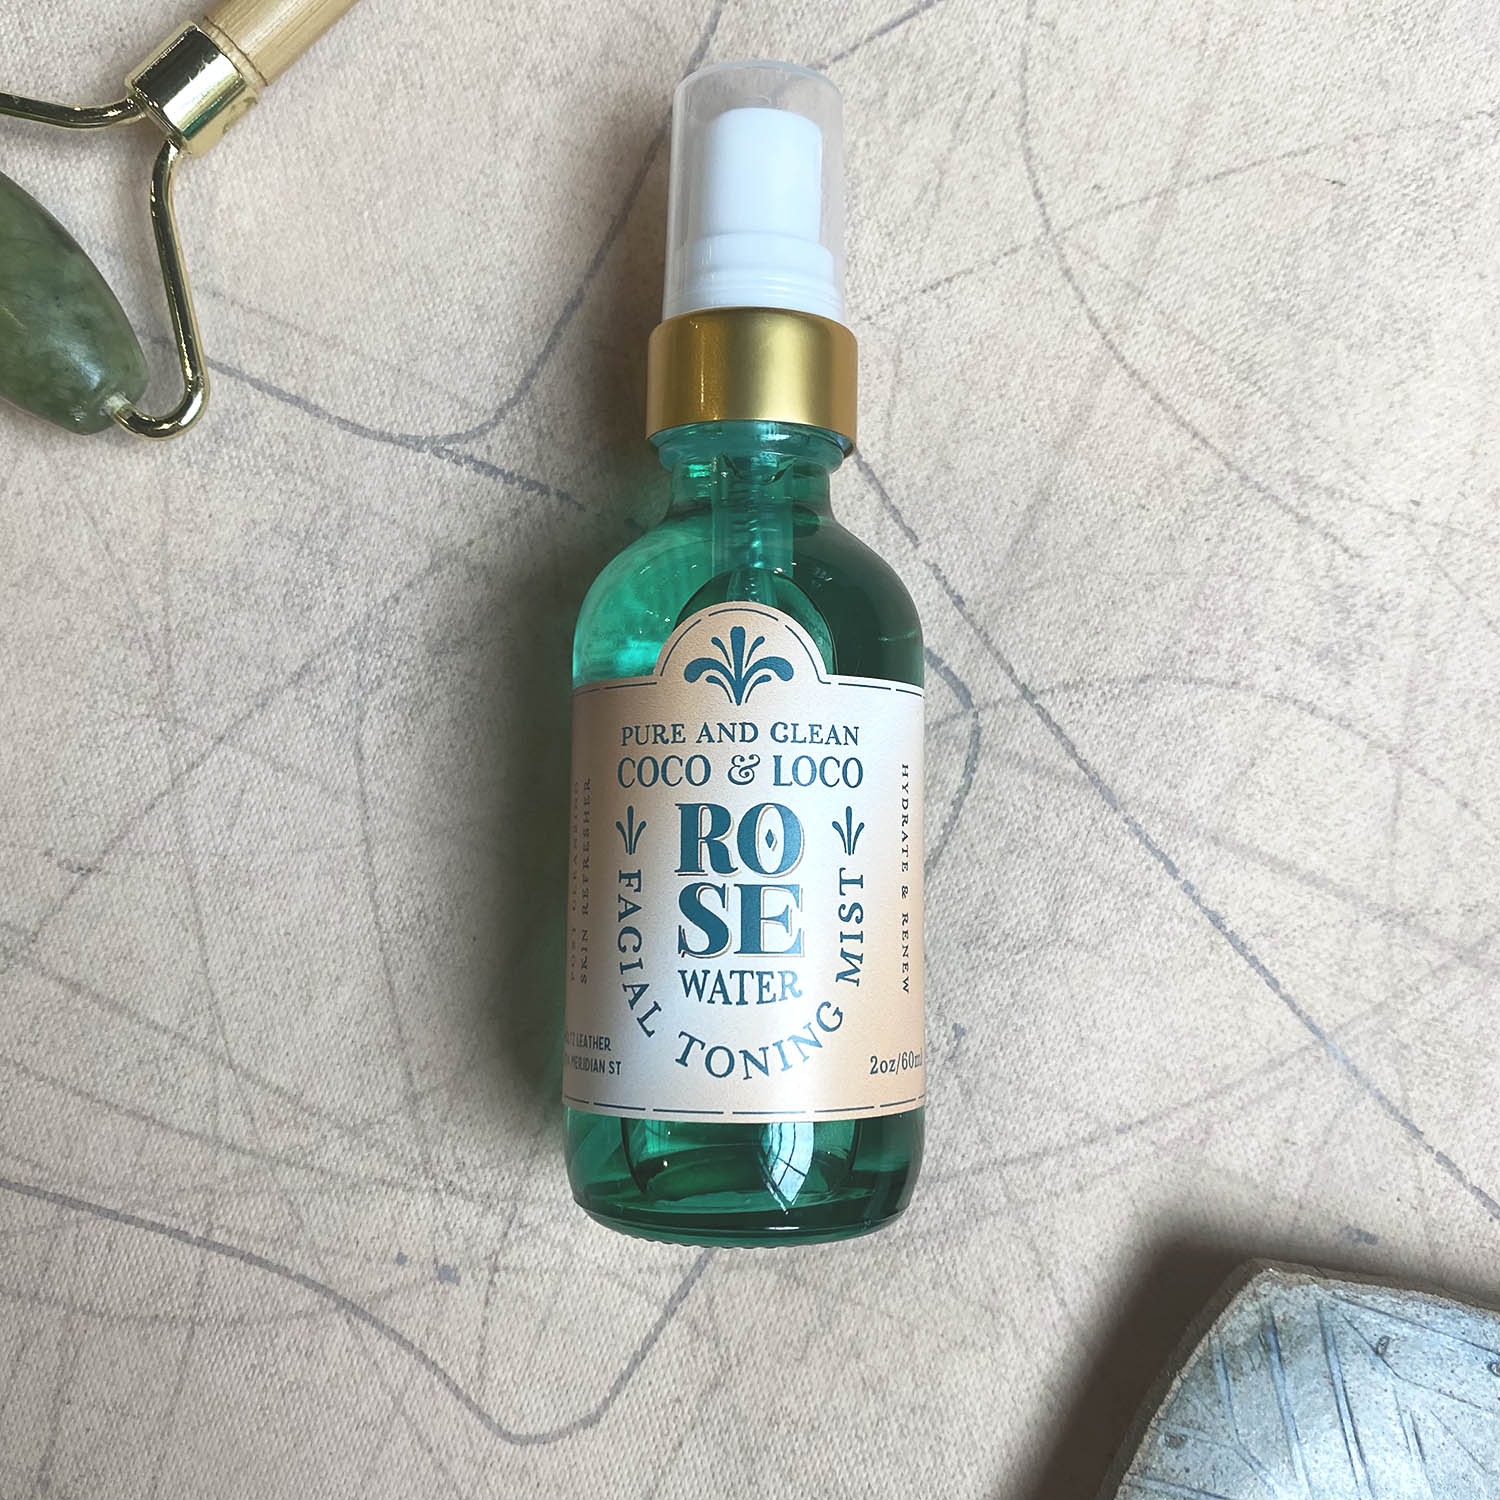 Rose water facial toning mist by Coco & Loco in a green misting spray bottle from Holtz Leather Co in Huntsville, Alabama